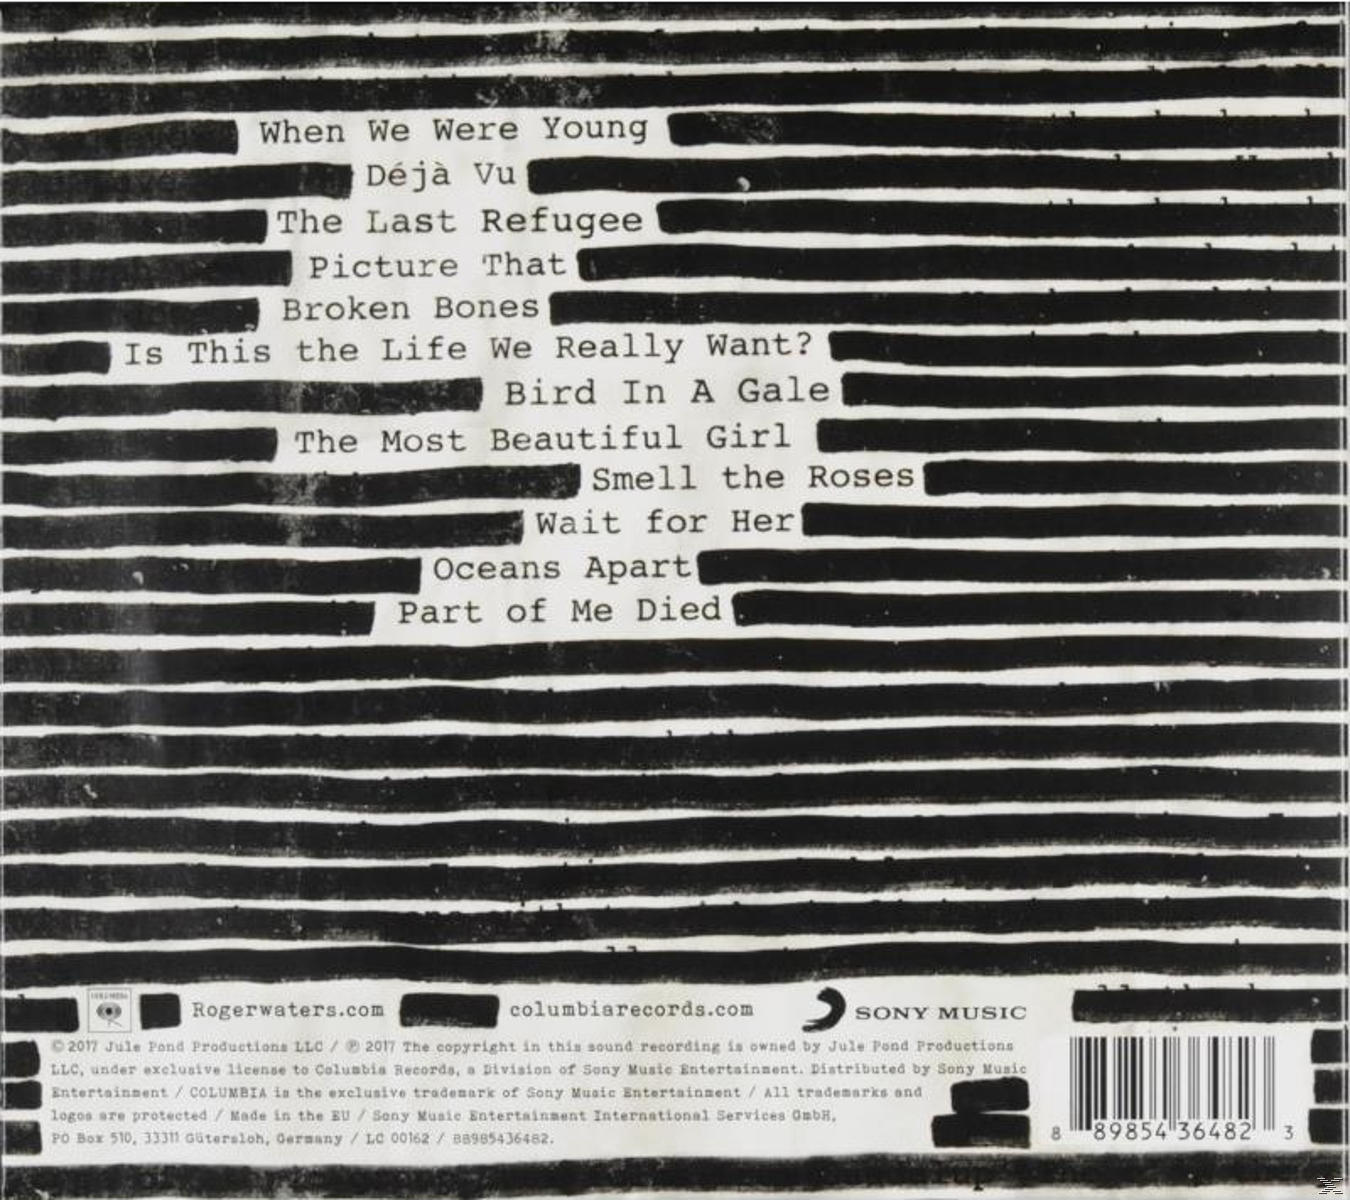 Roger Waters - Want Really - We Life (CD) Is The This